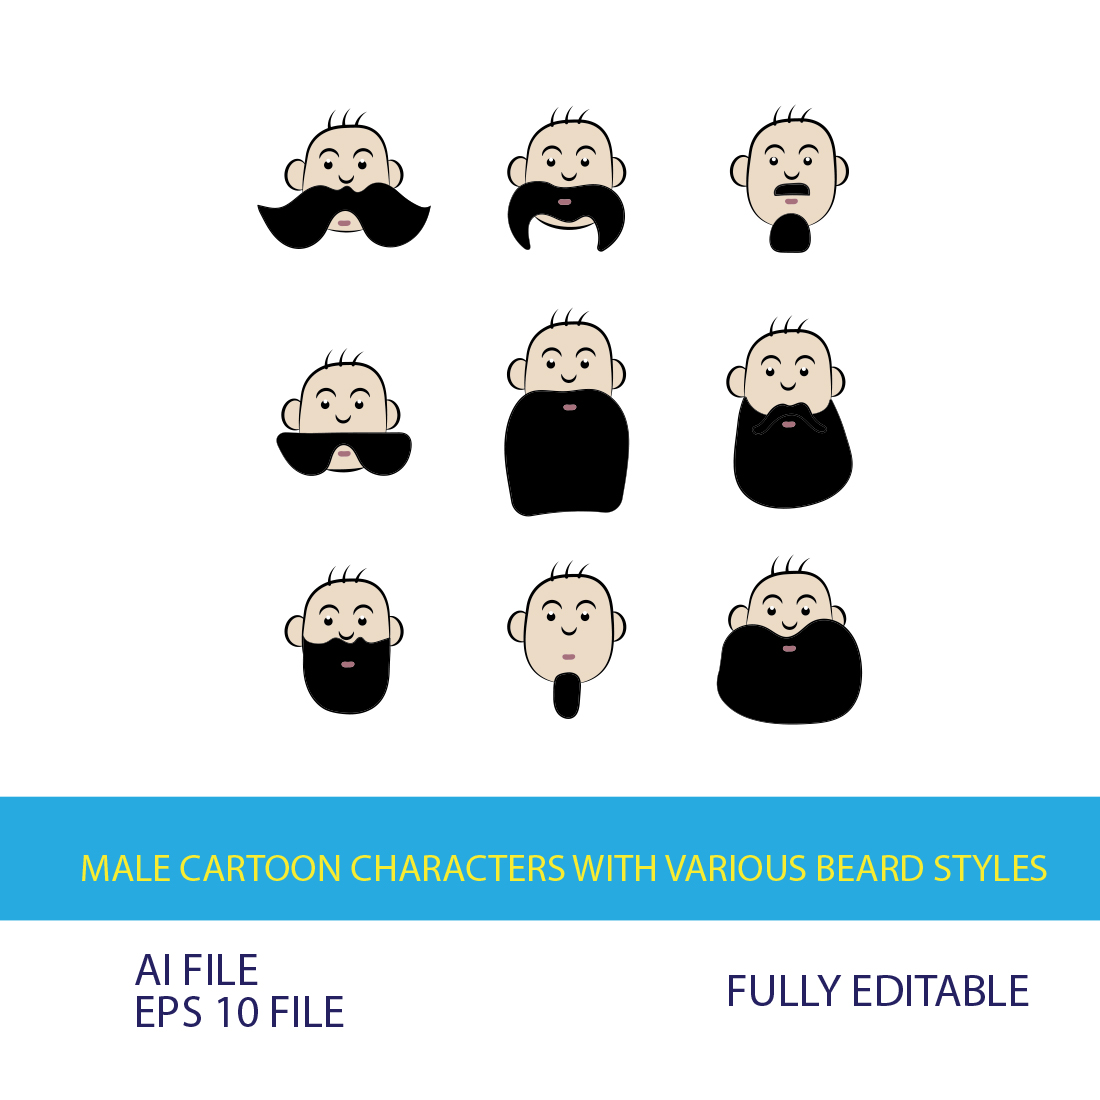 Male cartoon characters with various beard styles preview image.